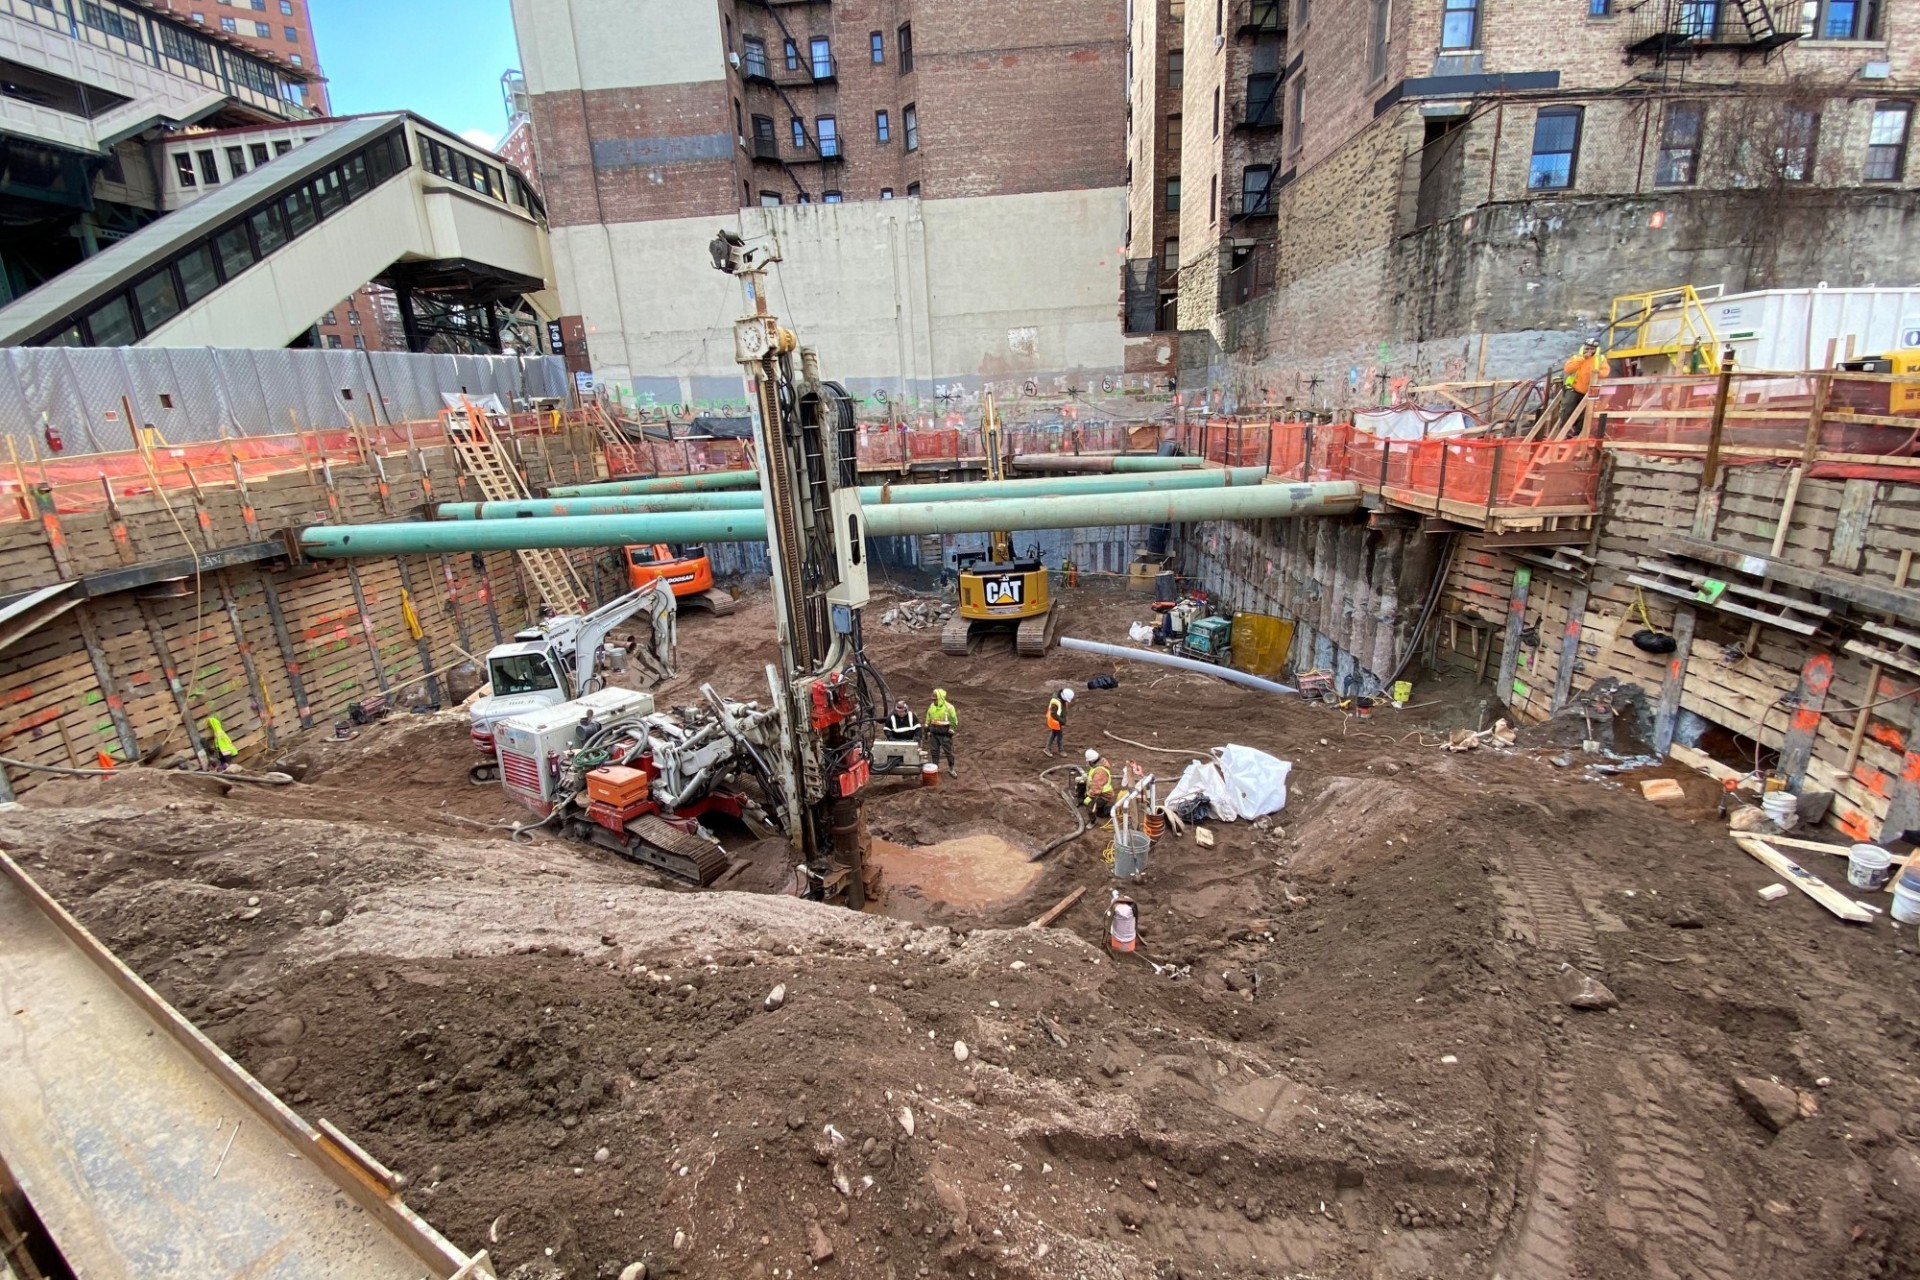 Excavation work being performed on a construction site.